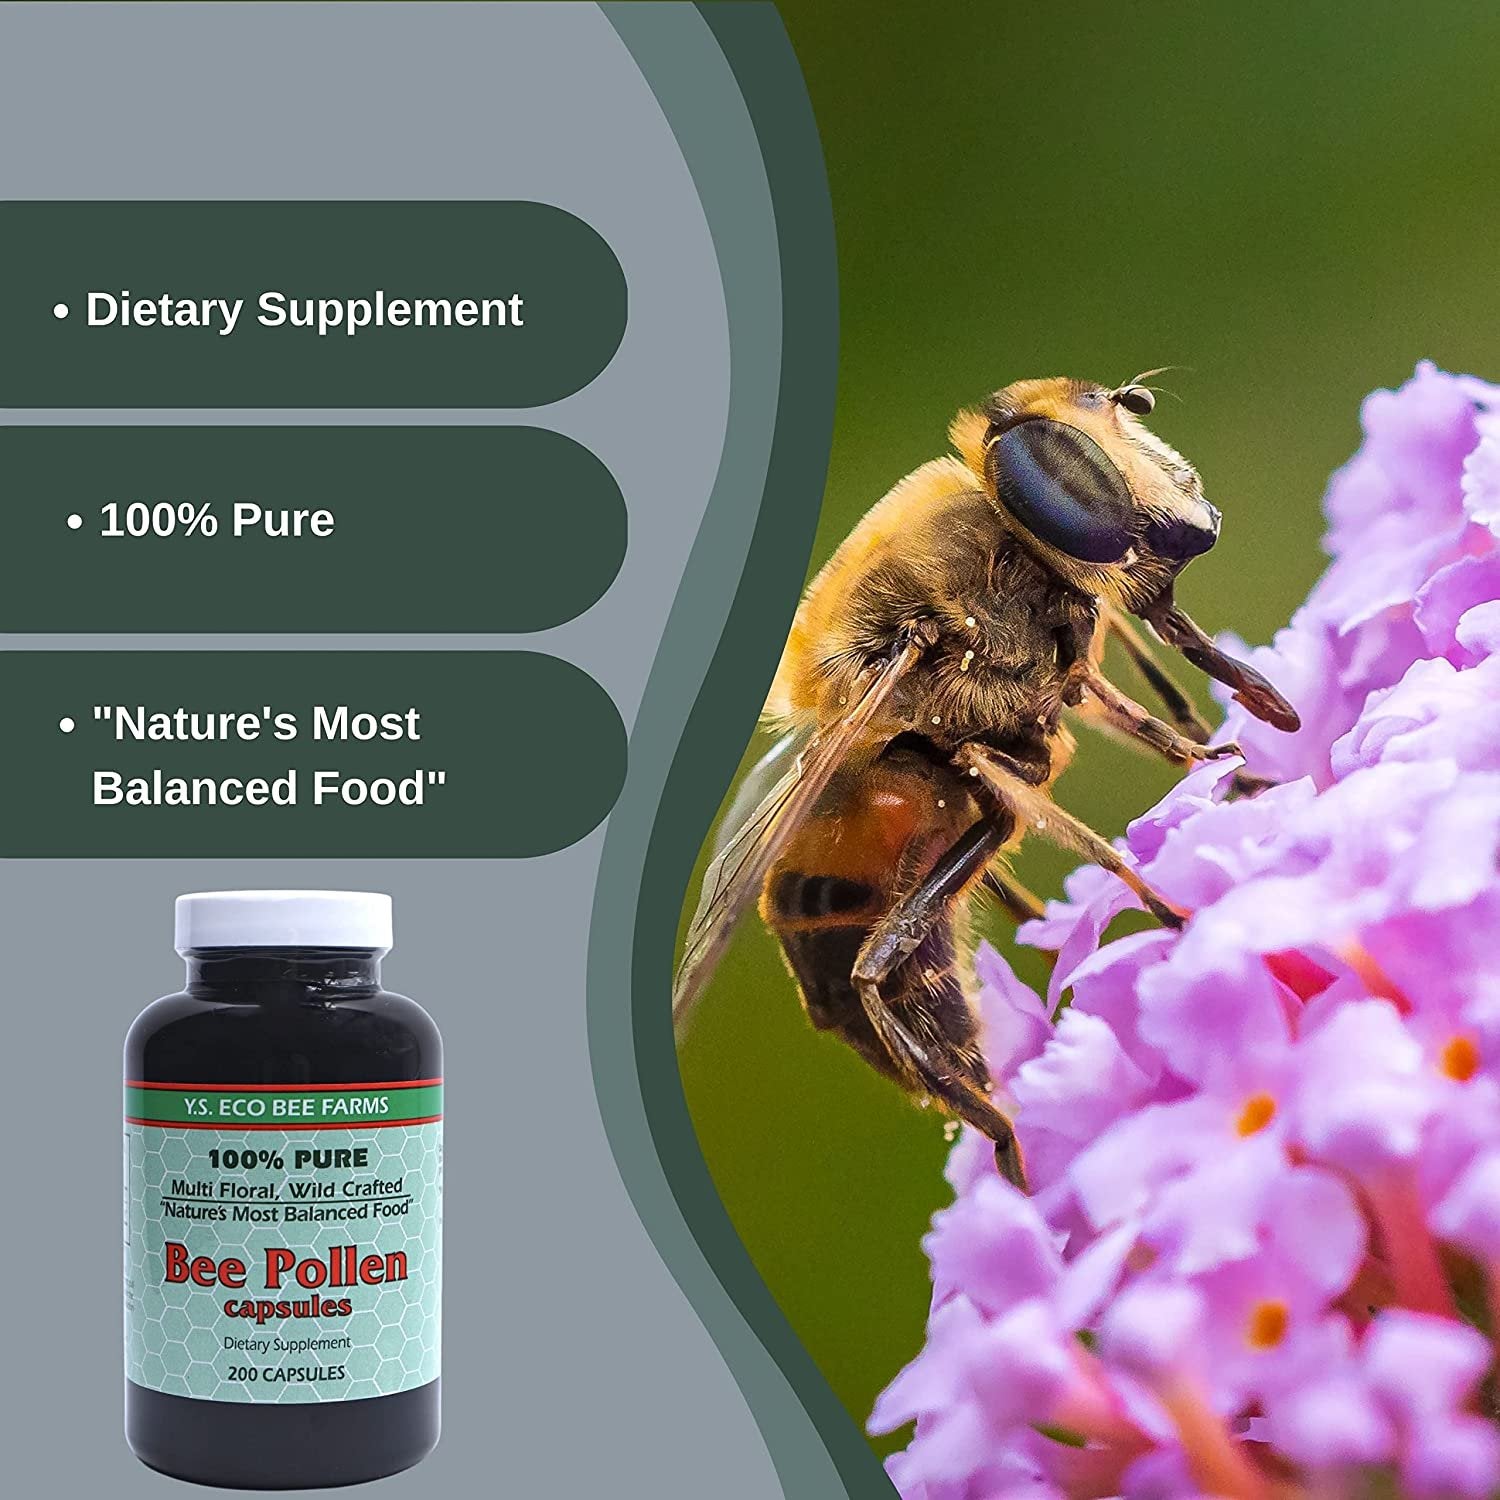 Y.S. Eco Bee Farms 100% Pure, Wild Crafted Bee Pollen Capsules - Organic Bee Pollen Vitamin Supplements Amino Acids, Organic Protein, Vitamin C, Vitamin B12 Gluten Free - 200ct with Bonus Key Chain